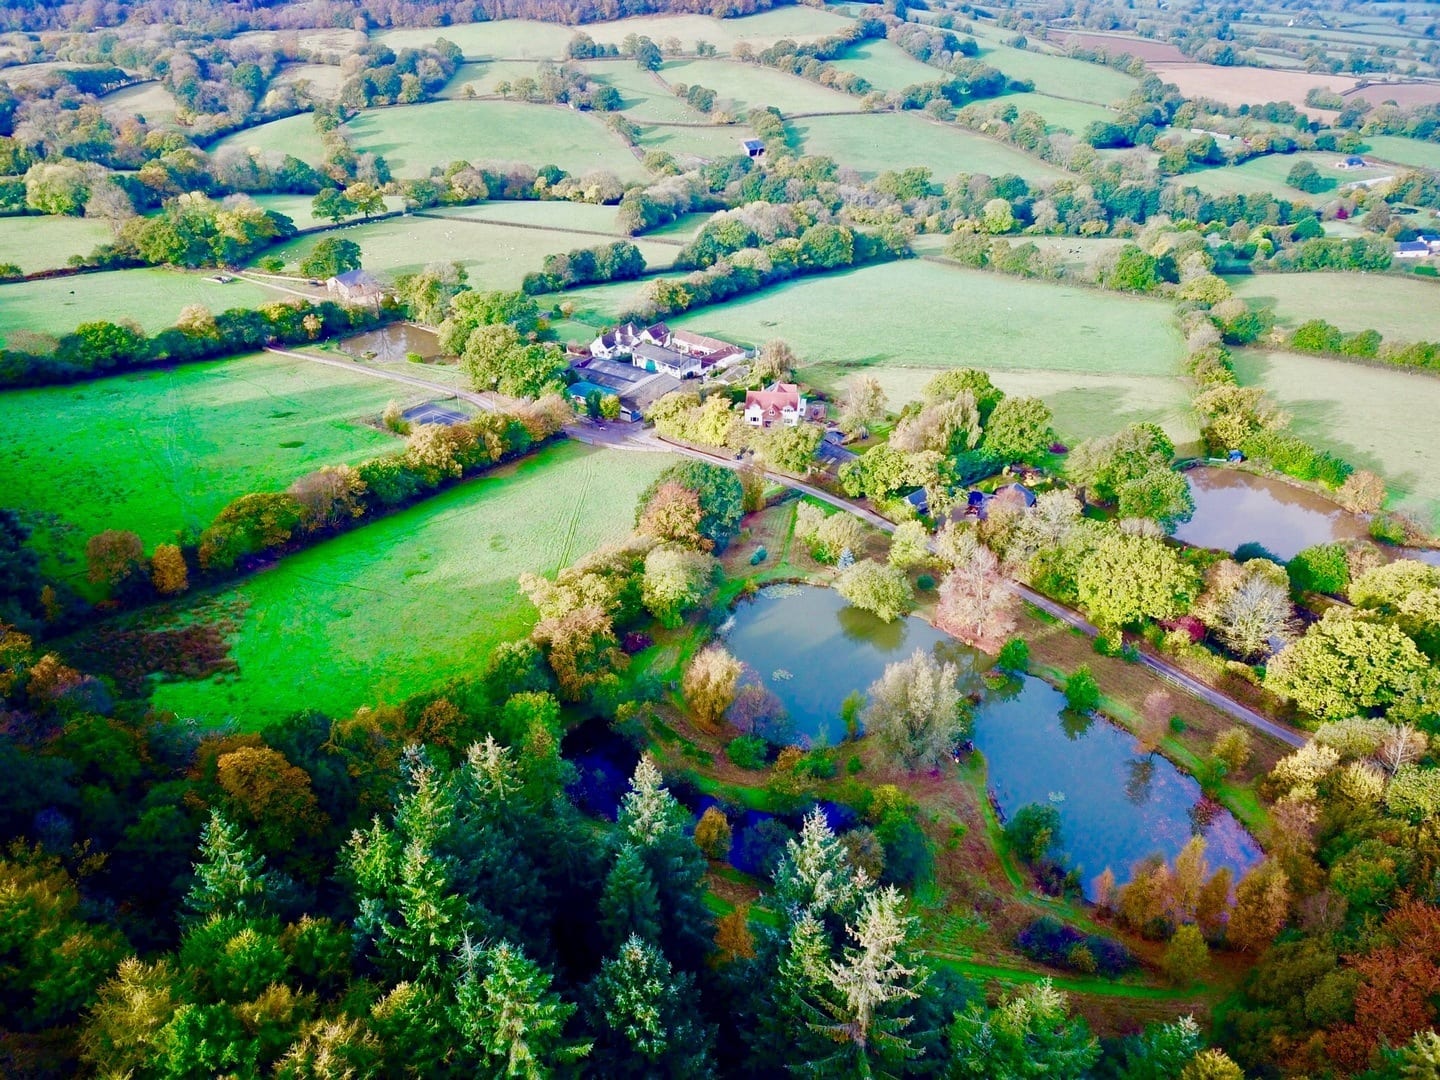 Aerial views of South Farm showing the lakes